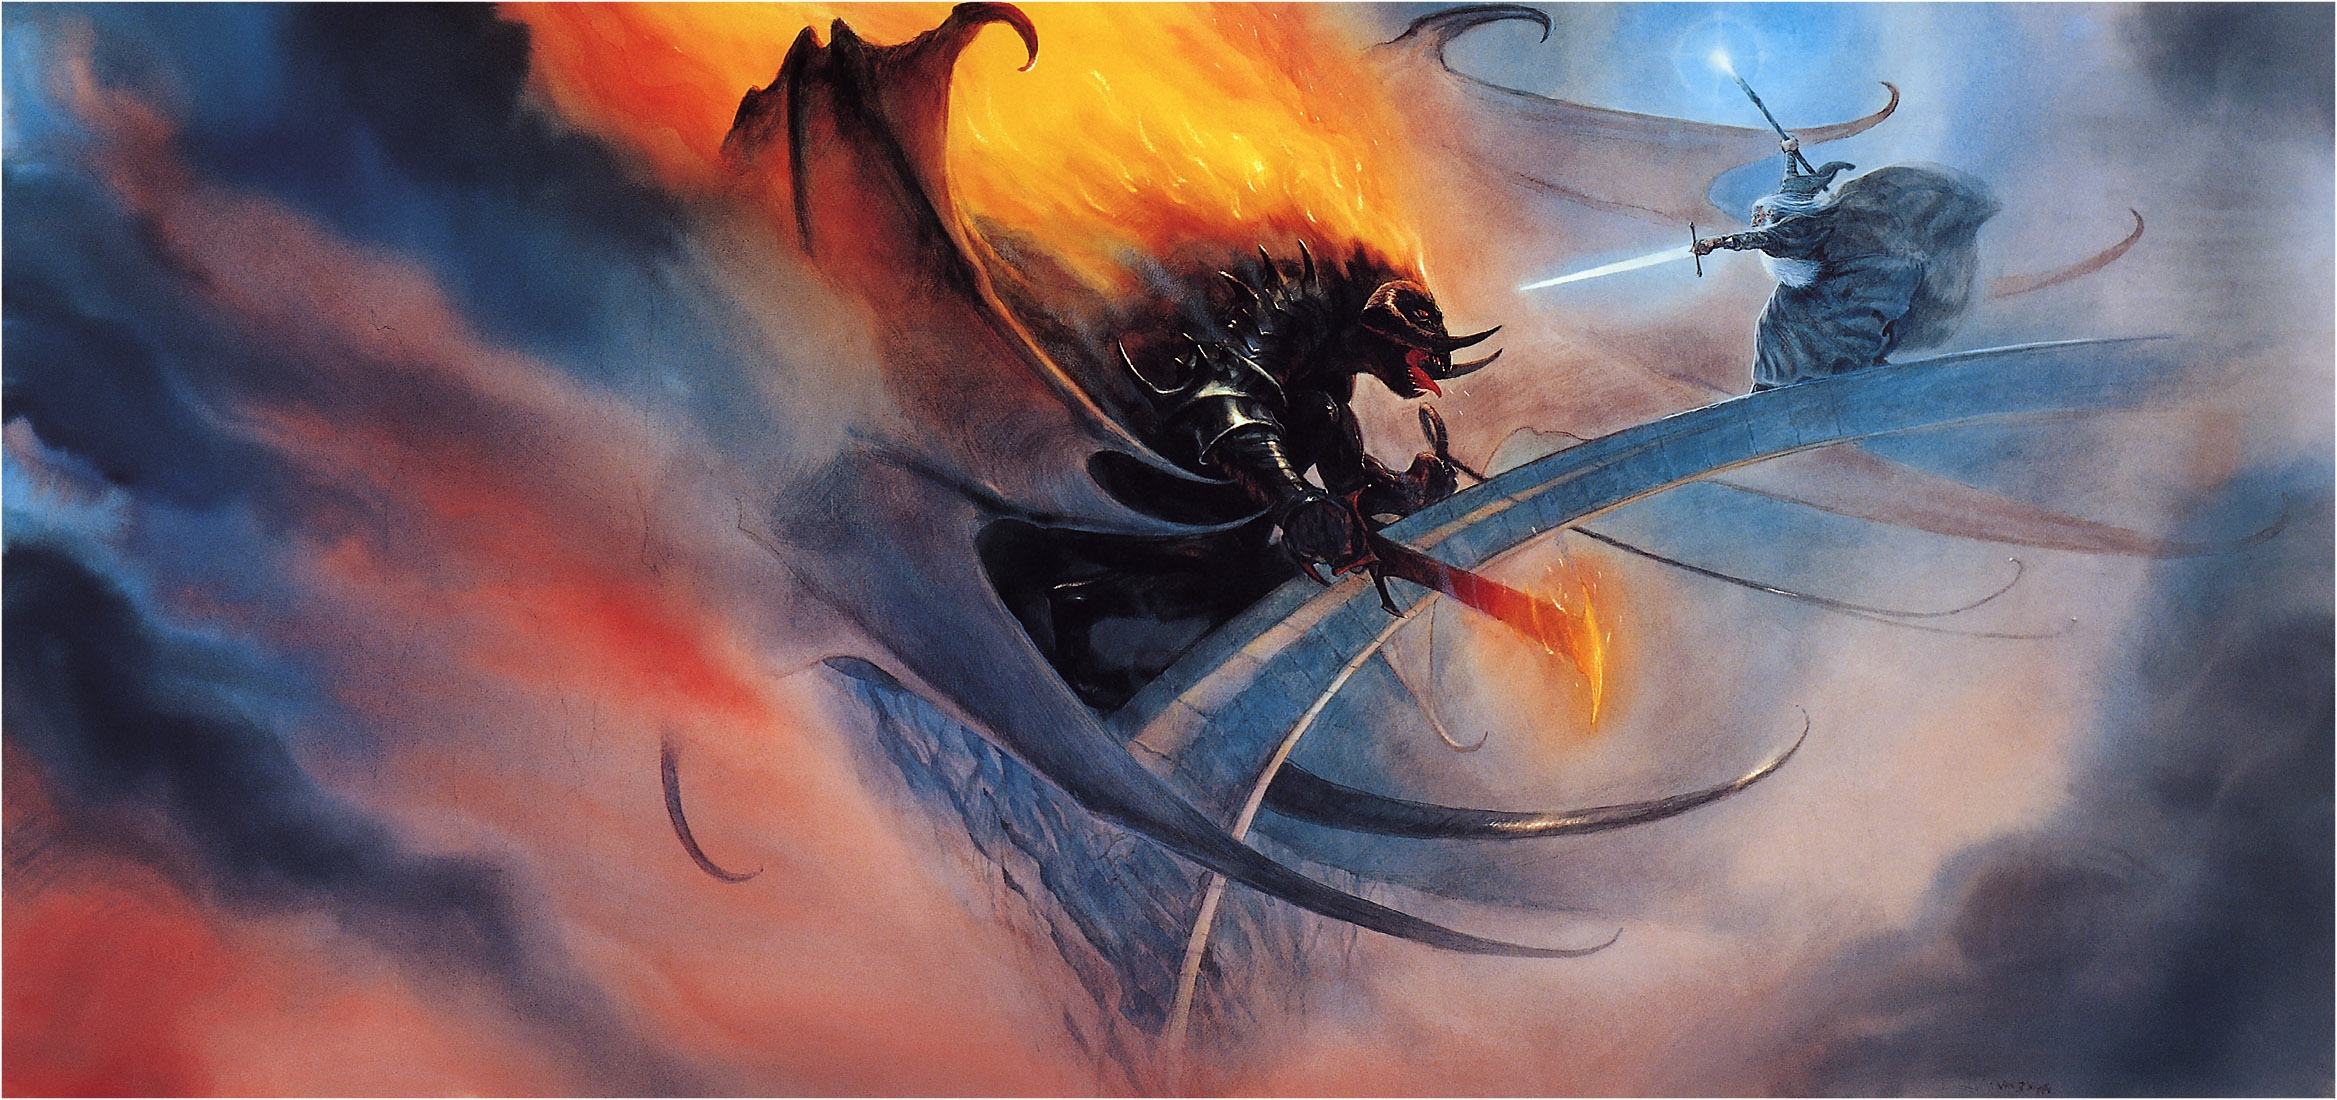 Balrog Vs Gandalf Lord Of The Rings
 Wallpapers